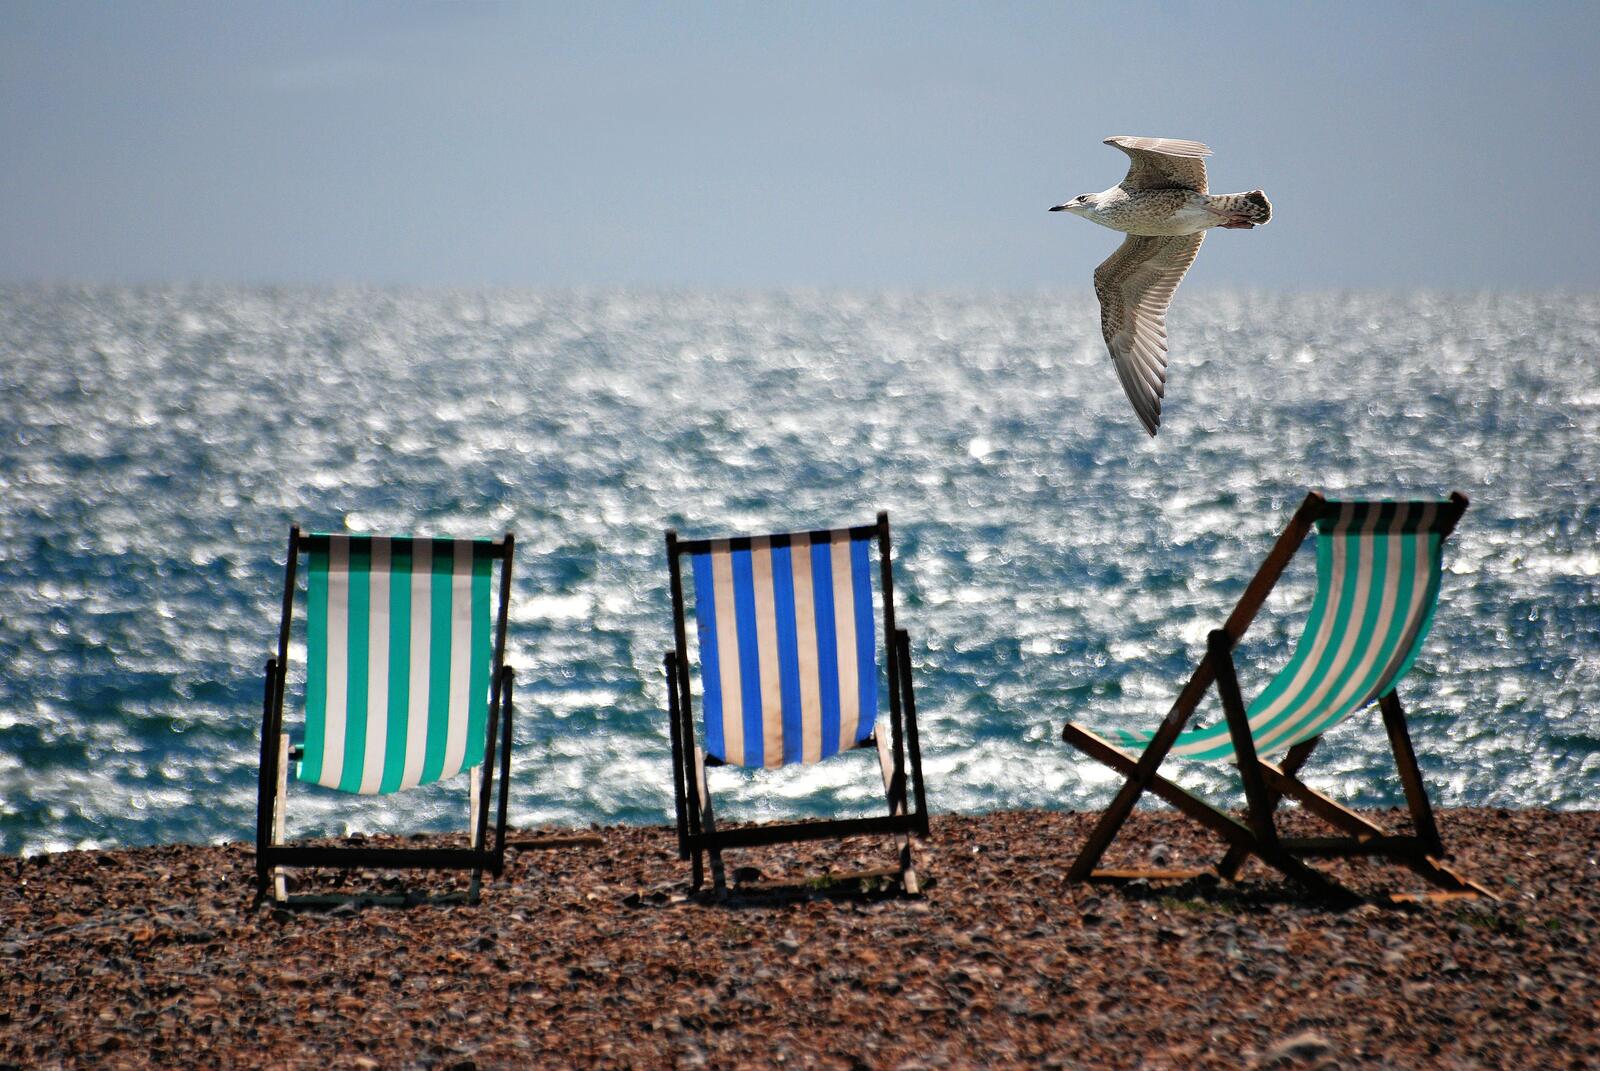 Free photo A Sea Gull flies over the lounge chairs on the beach